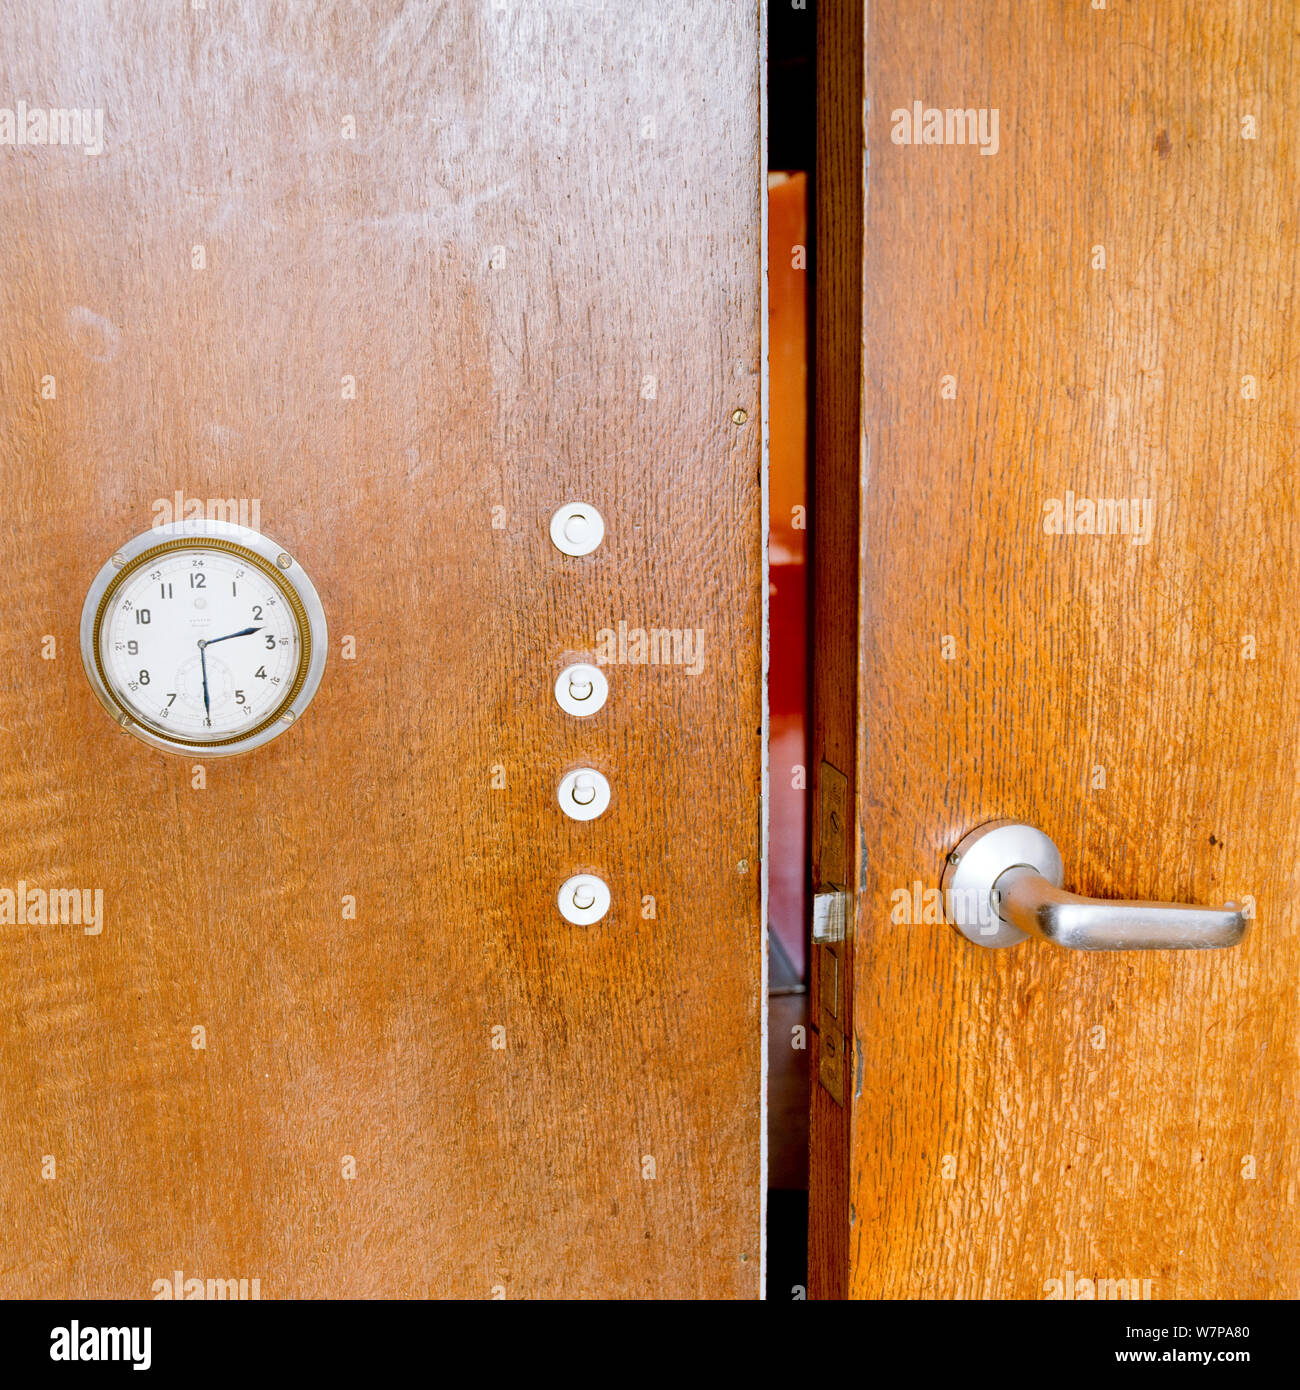 Open wooden cupboard with clock Stock Photo